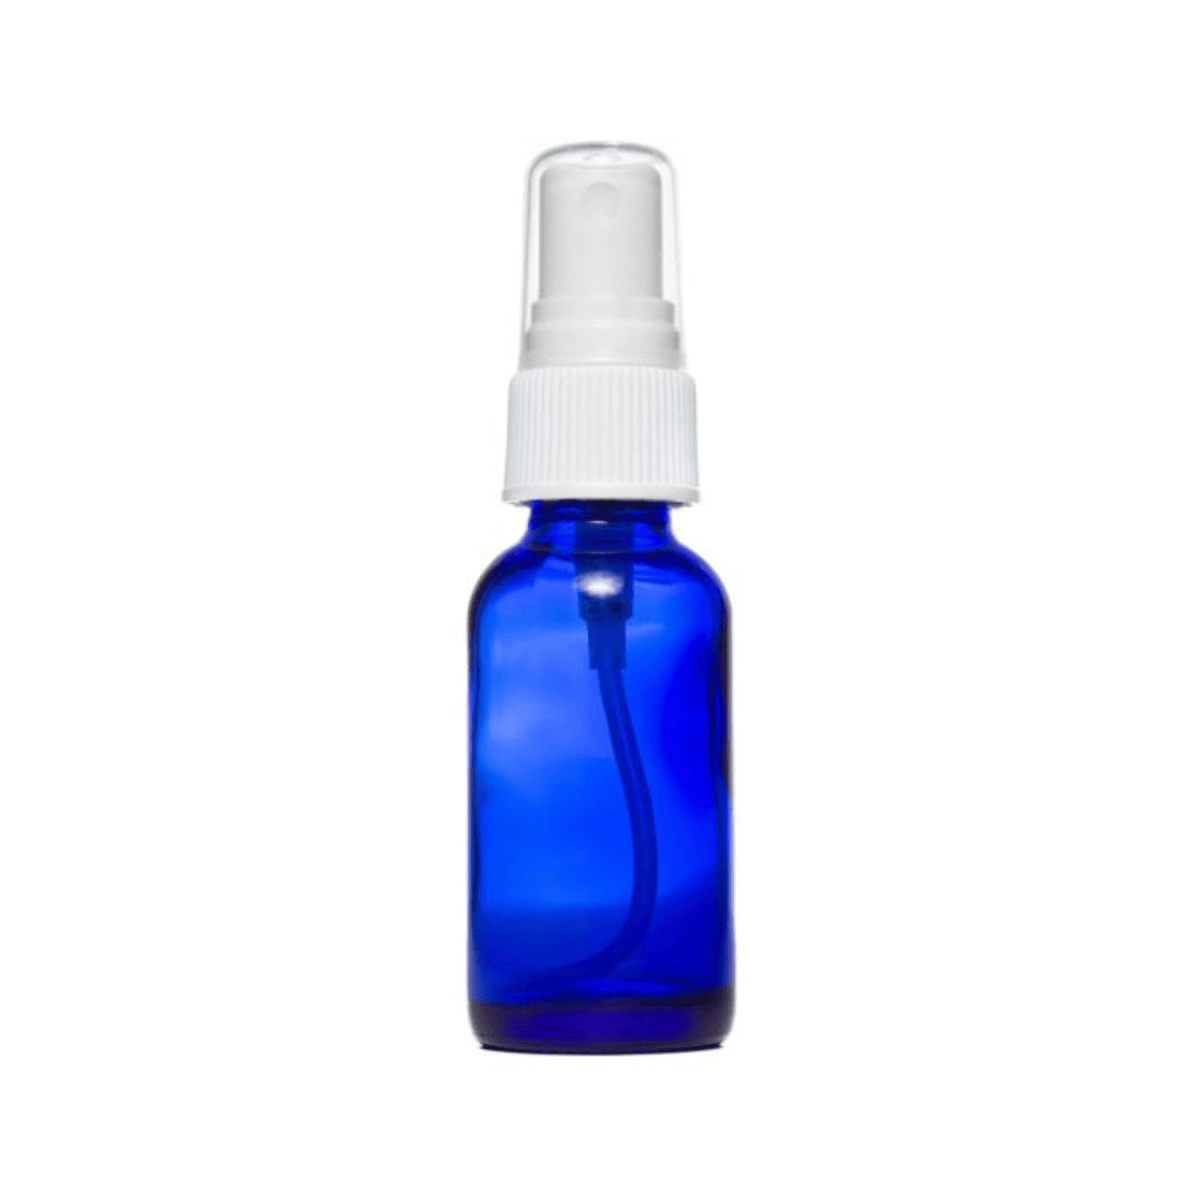 Primary Image of Blue Glass Bottle - Spray Top